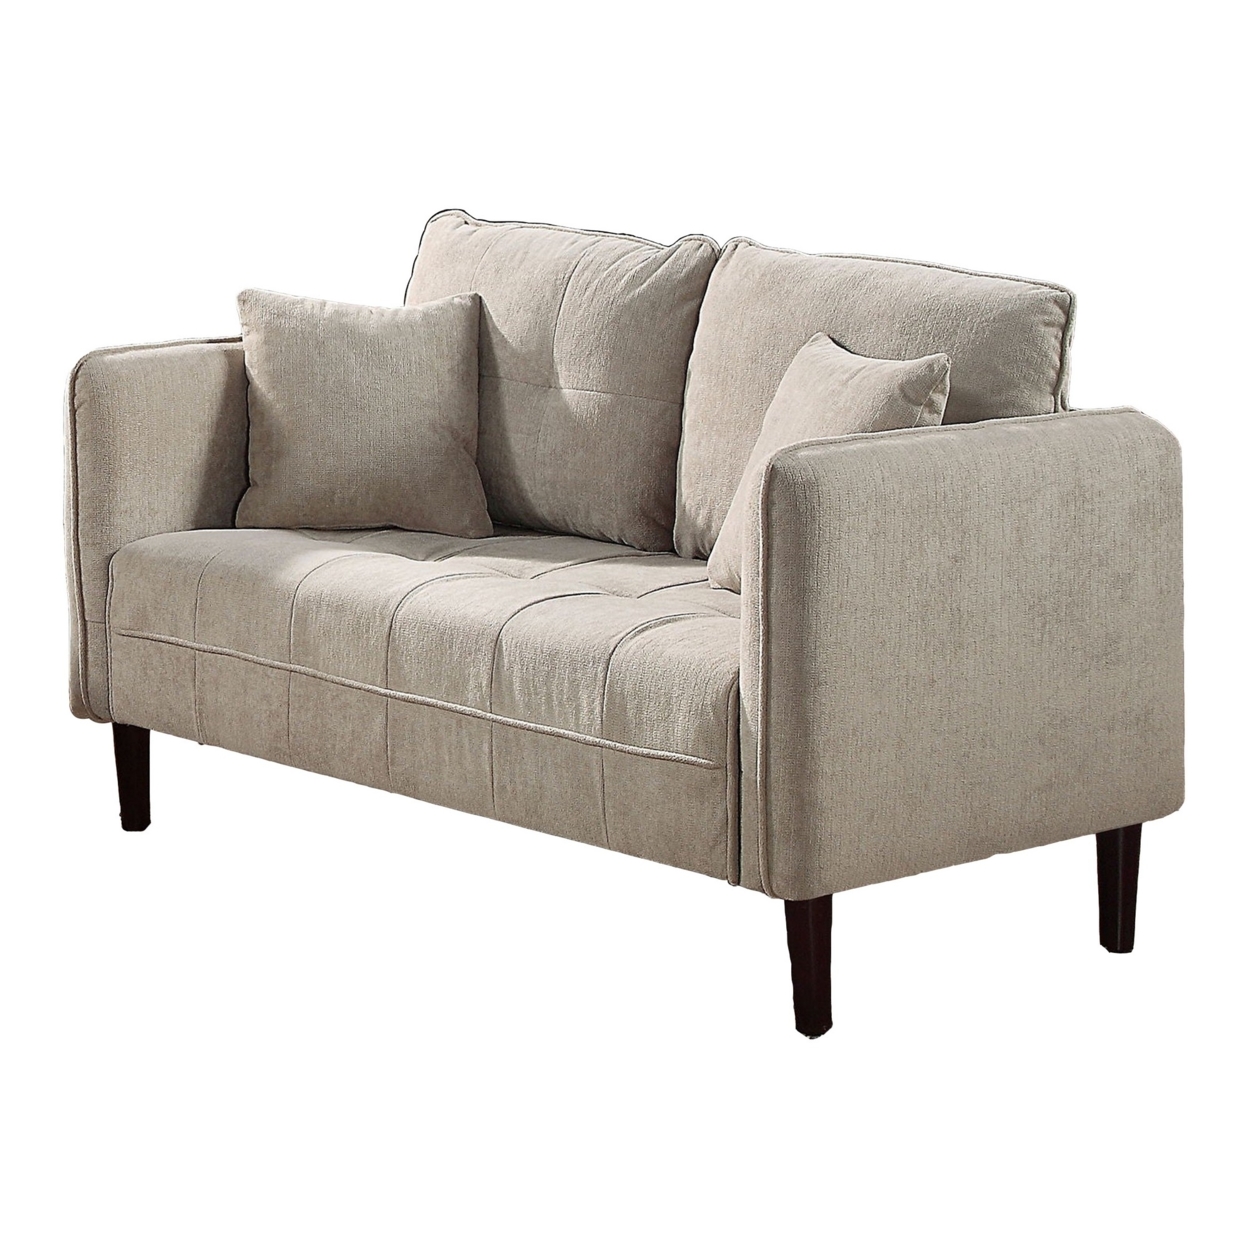 Hak 52 Inch Loveseat, Rounded Curved Arms, Biscuit Tufting, Wood Legs, Taupe - Saltoro Sherpi